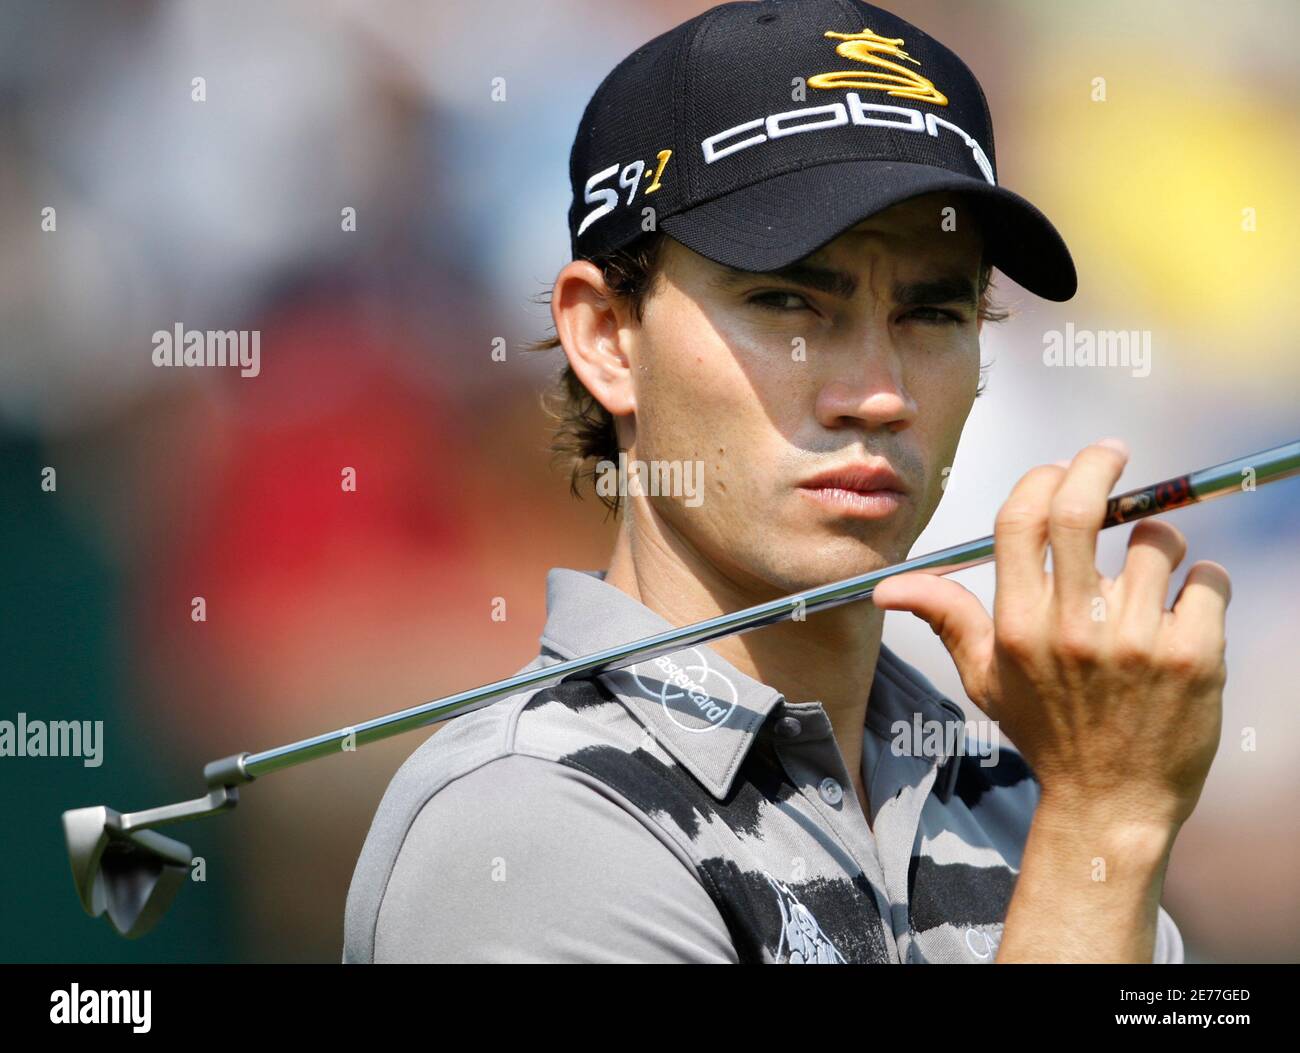 Camilo Villegas of Colombia looks on on the eighteenth green during the third round of the St. Jude Classic golf tournament at TPC Southwind in Memphis, Tennessee June 13, 2009.   REUTERS/Nikki Boertman    (UNITED STATES SPORT GOLF) Stock Photo